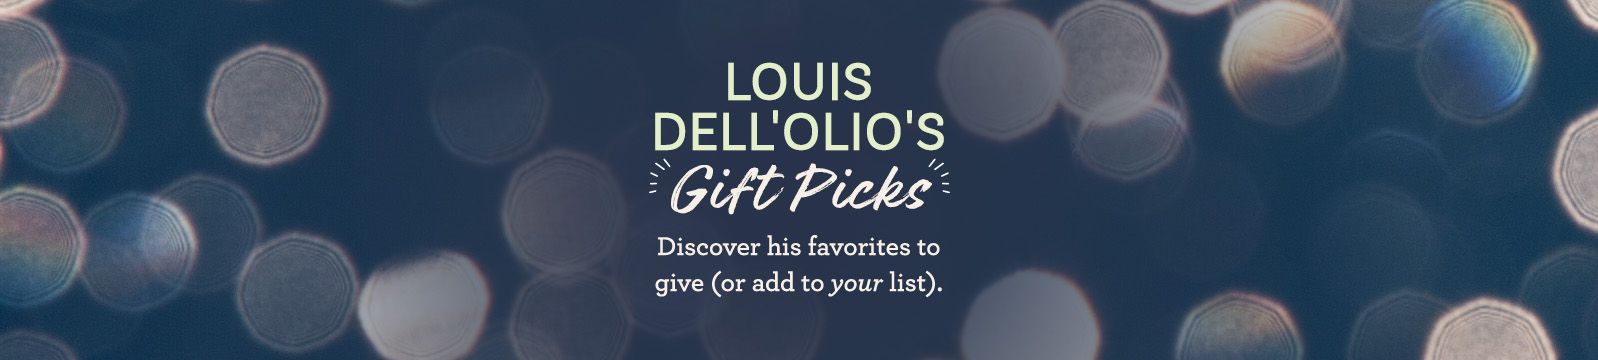 Louis Dell'Olio's Gift Picks.  Discover his favorites to give (or add to your list).